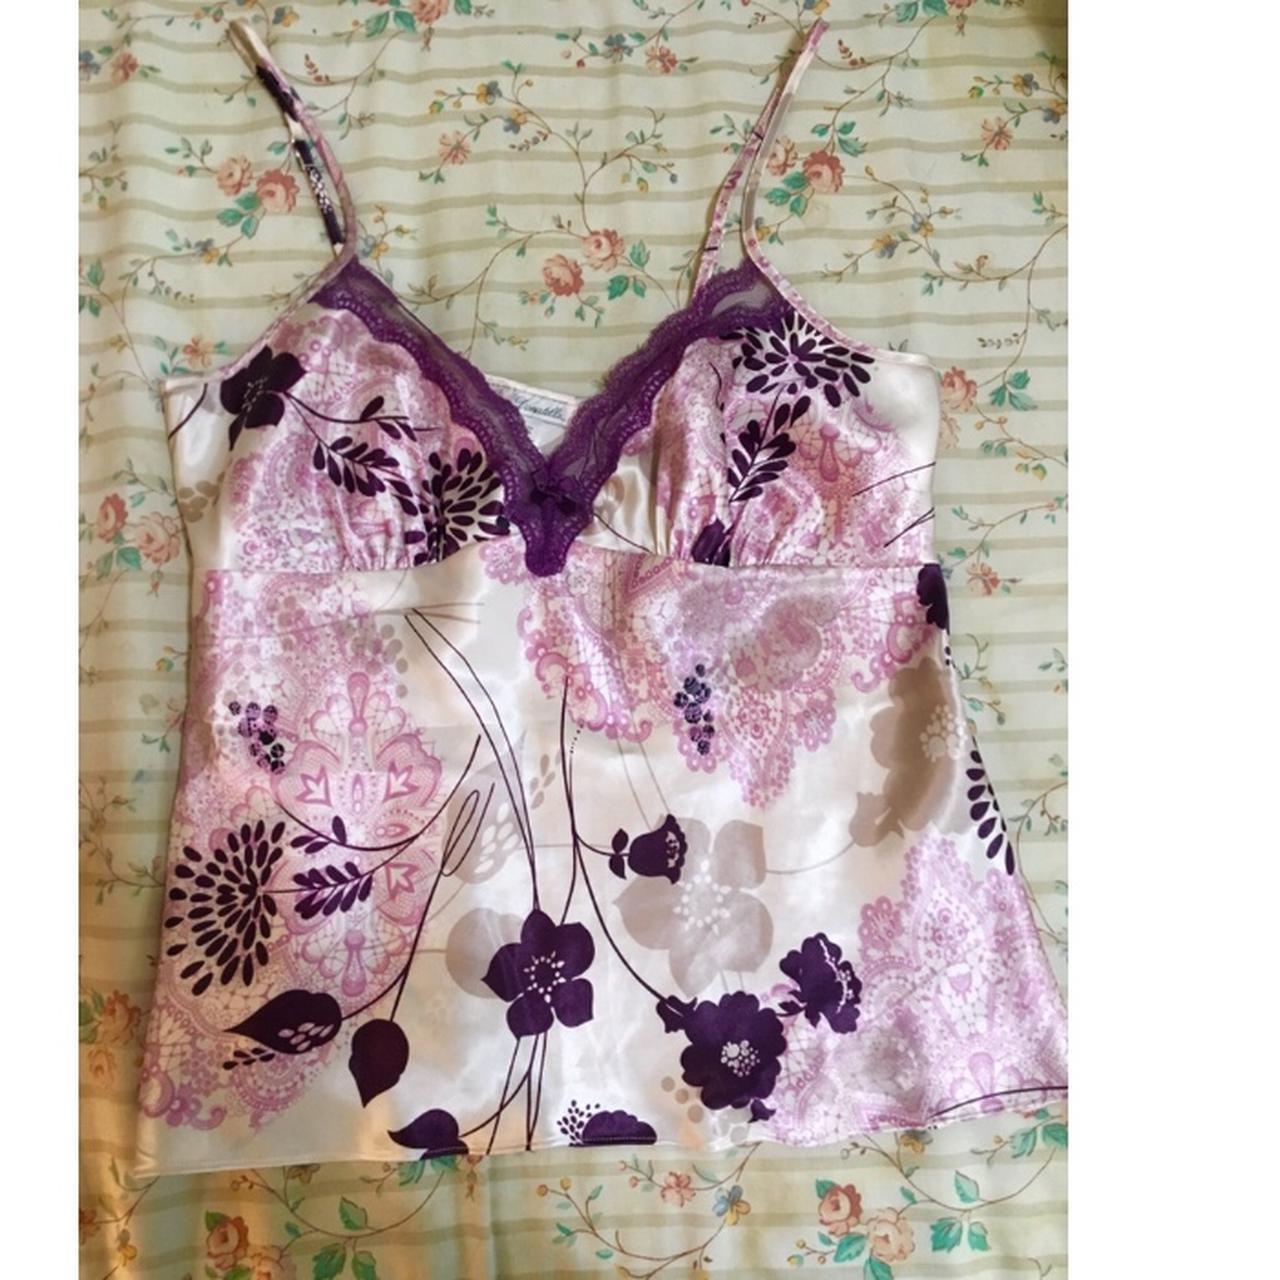 Product Image 1 - Y2K Lacy Cami Top
Straps are